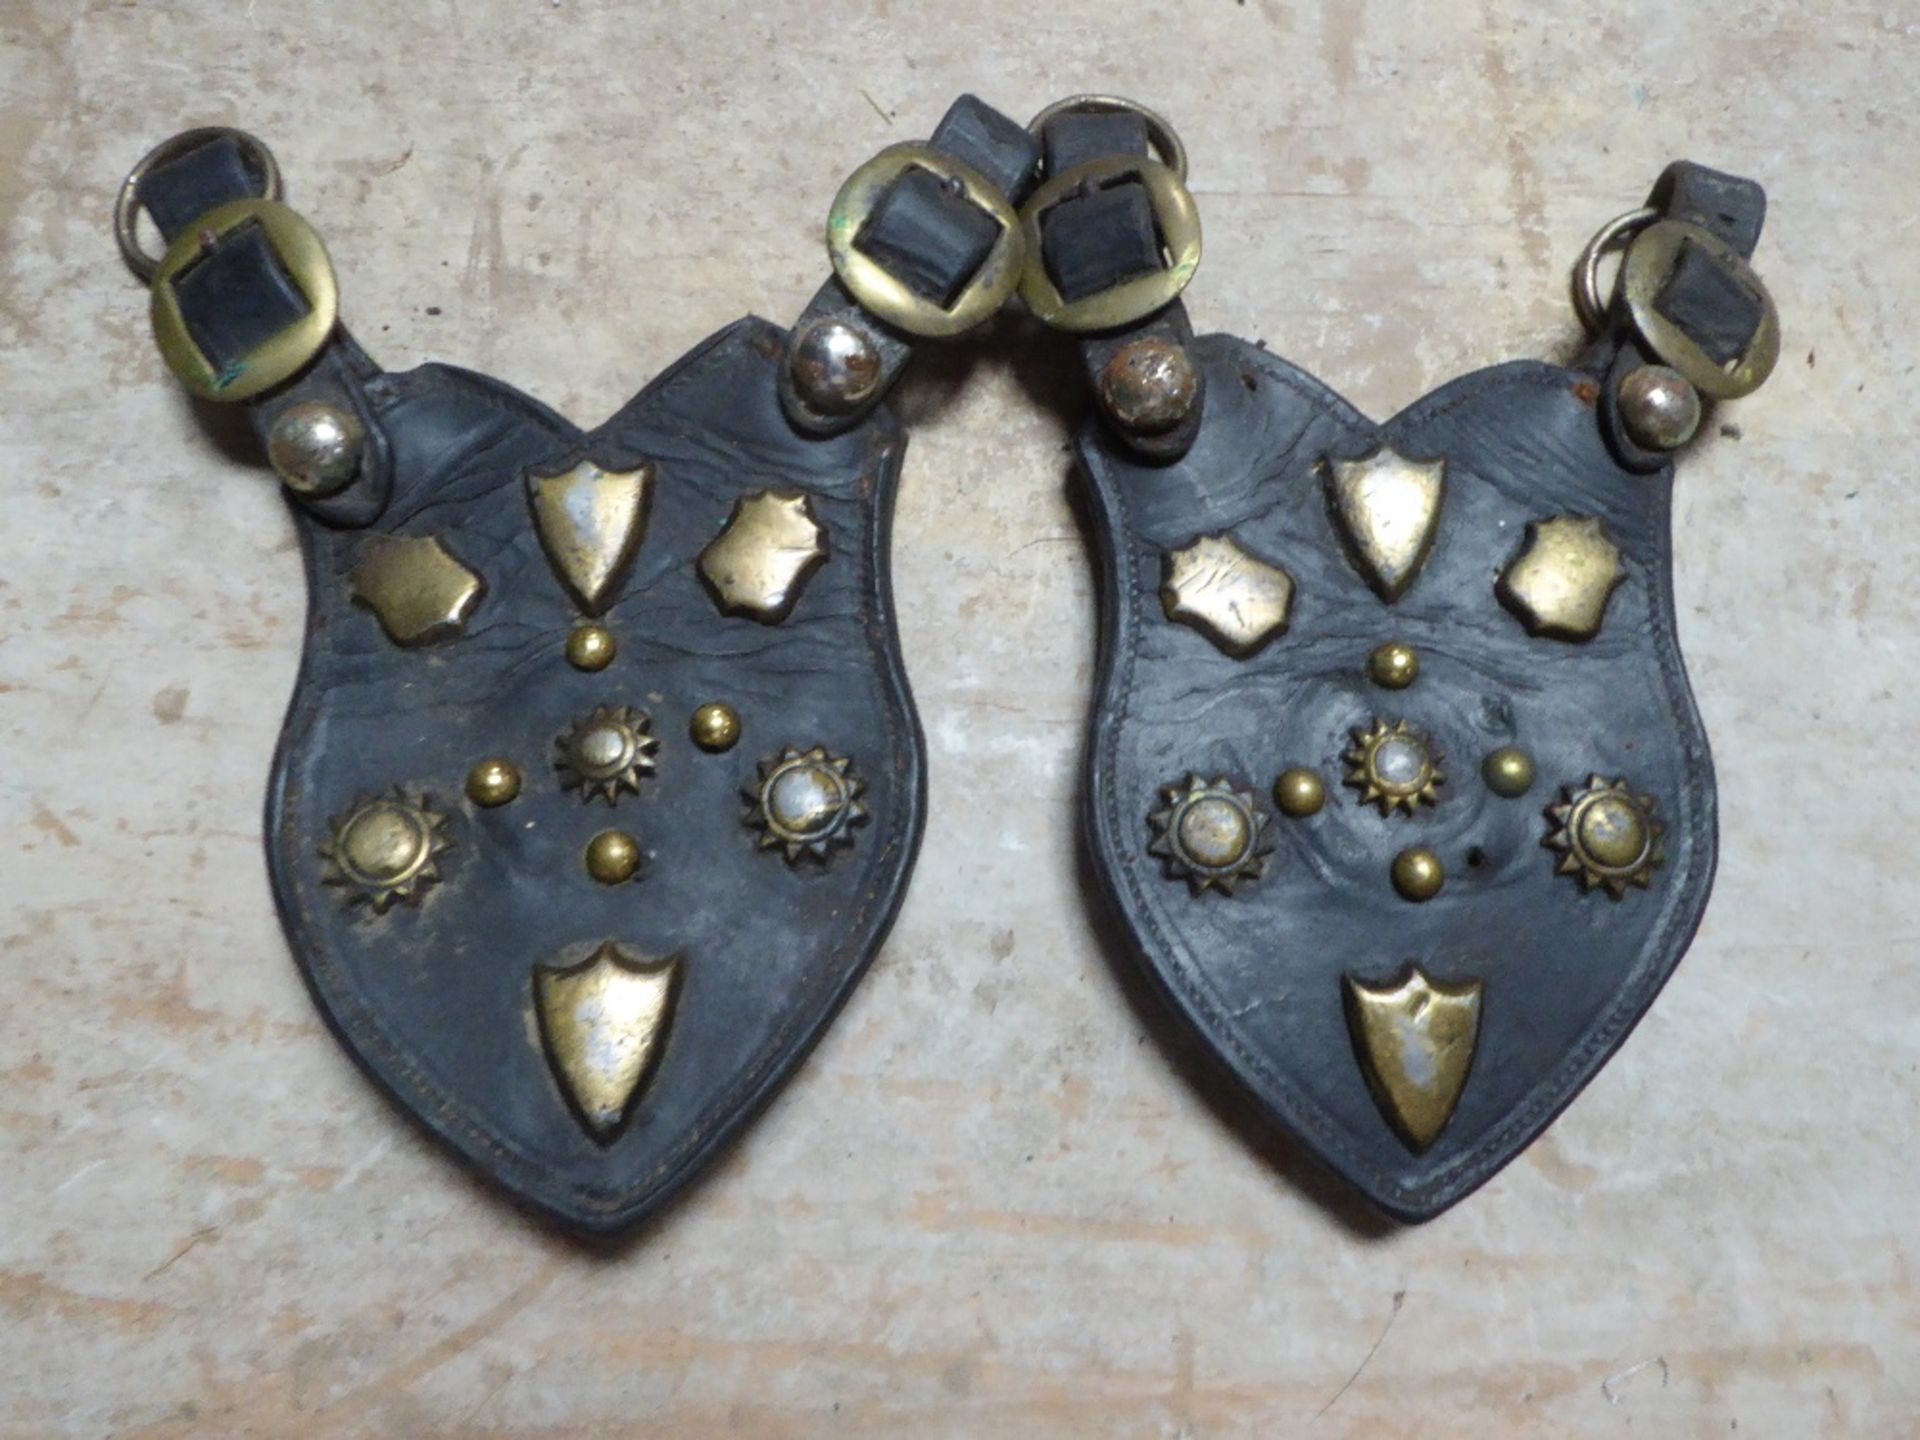 Pair of shaped leathers each with various brass studs and buckle